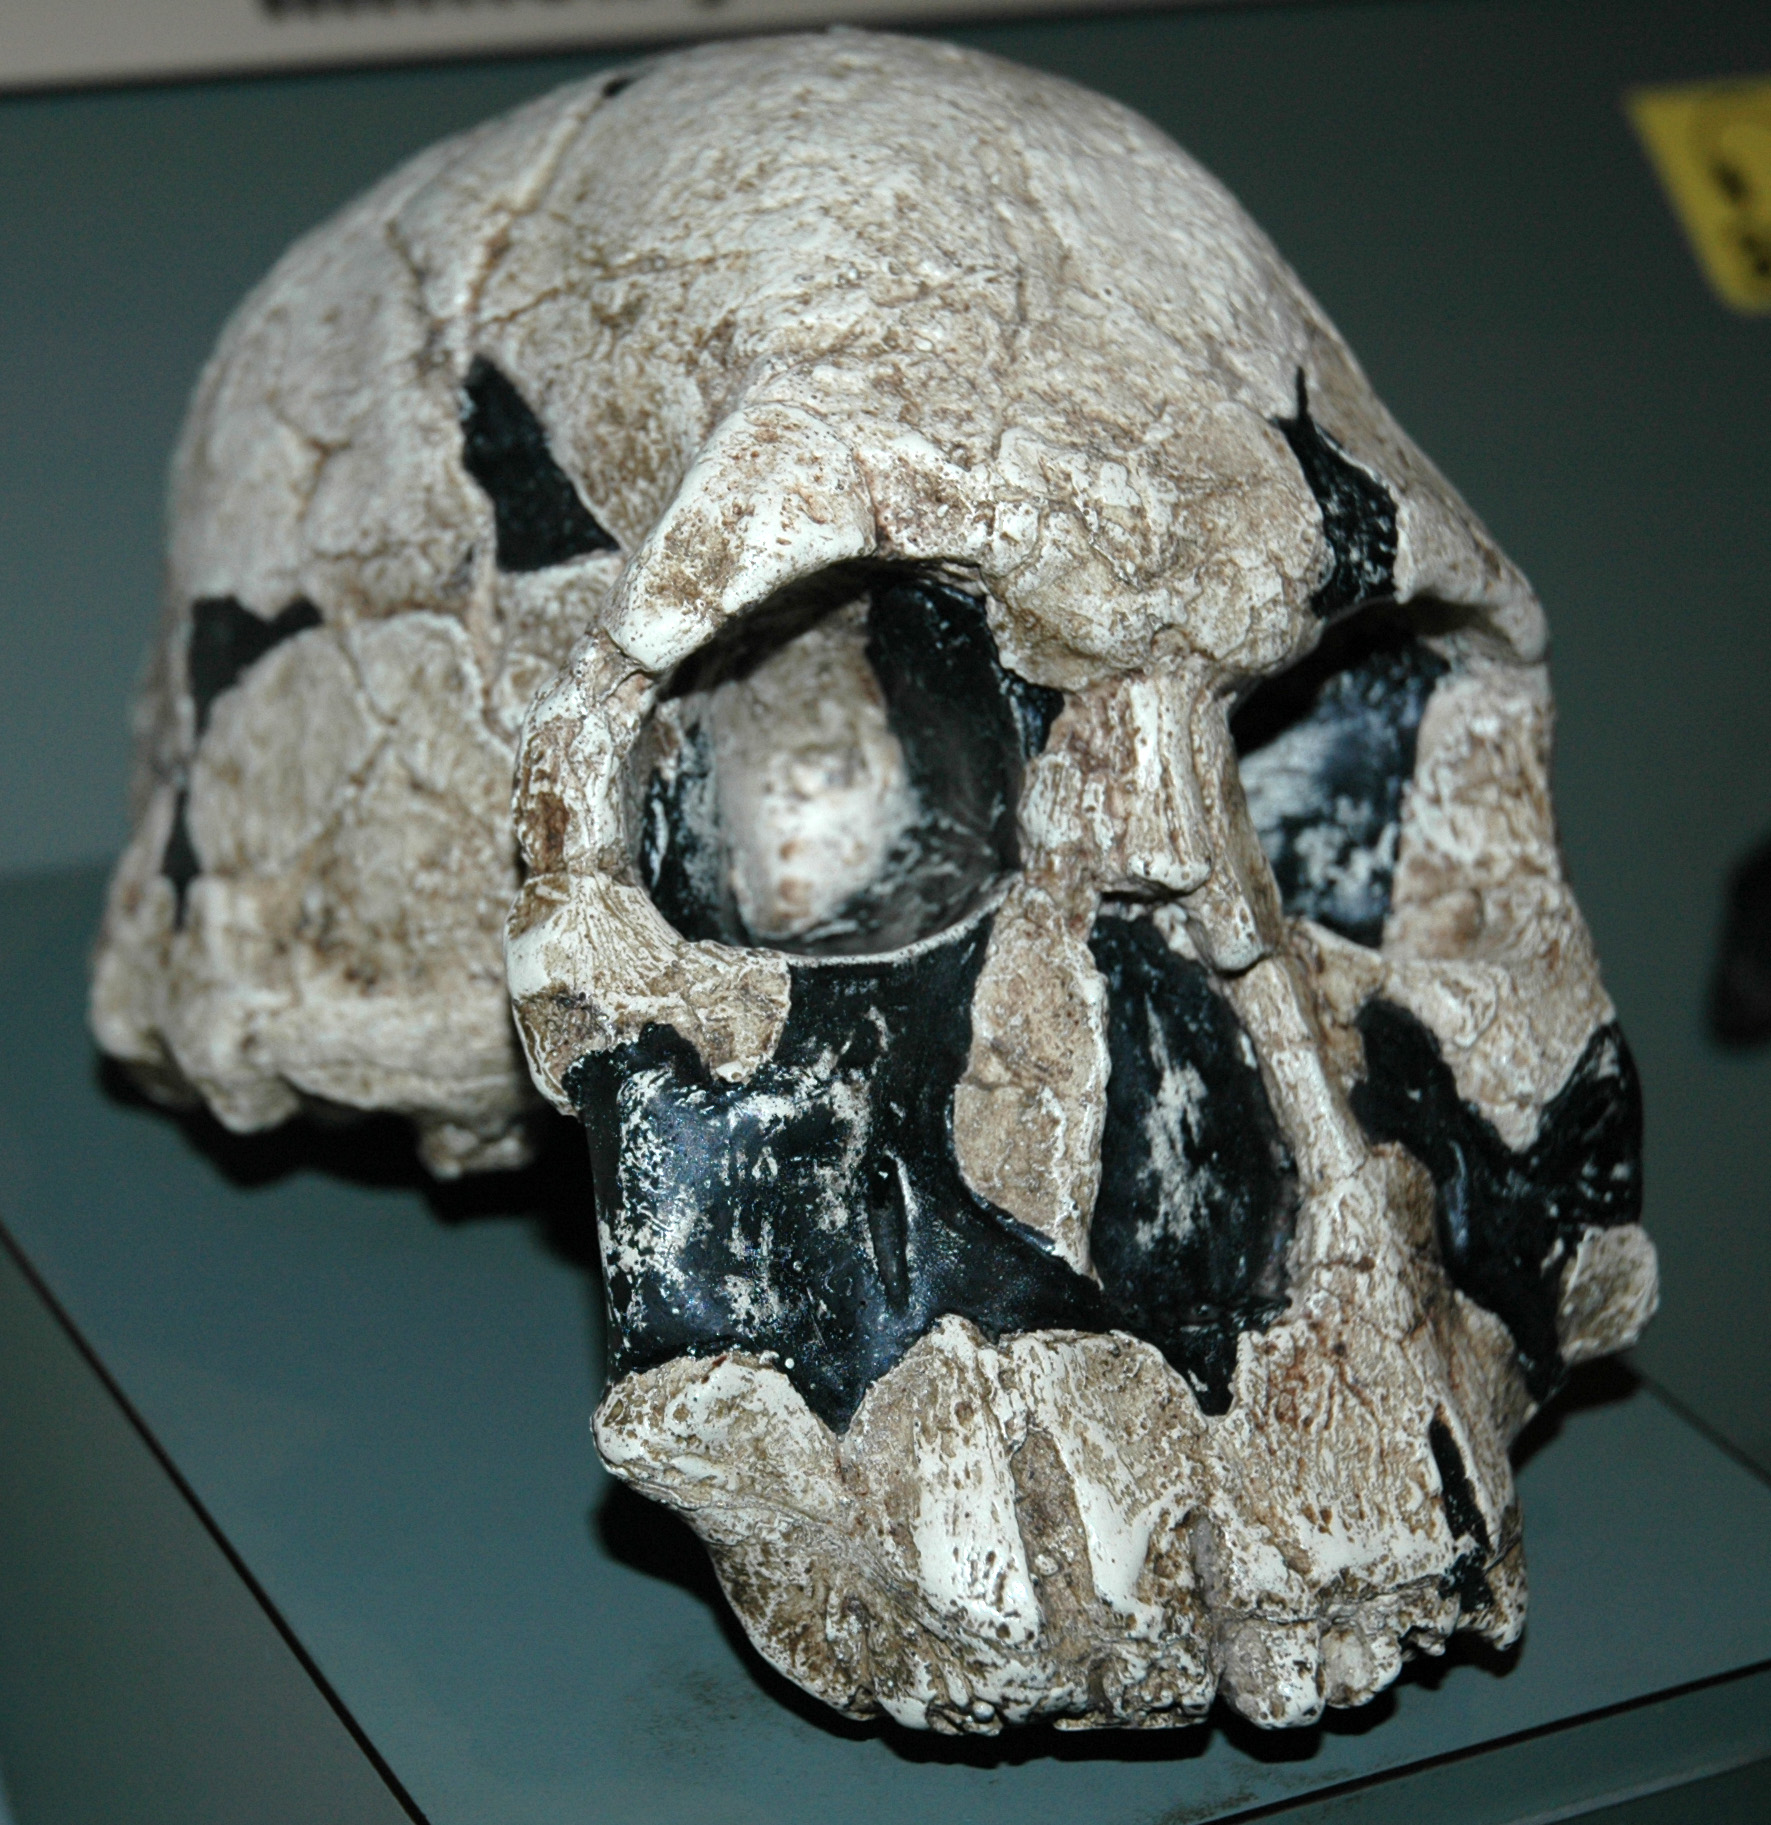 the skull was made of stone and has black paint